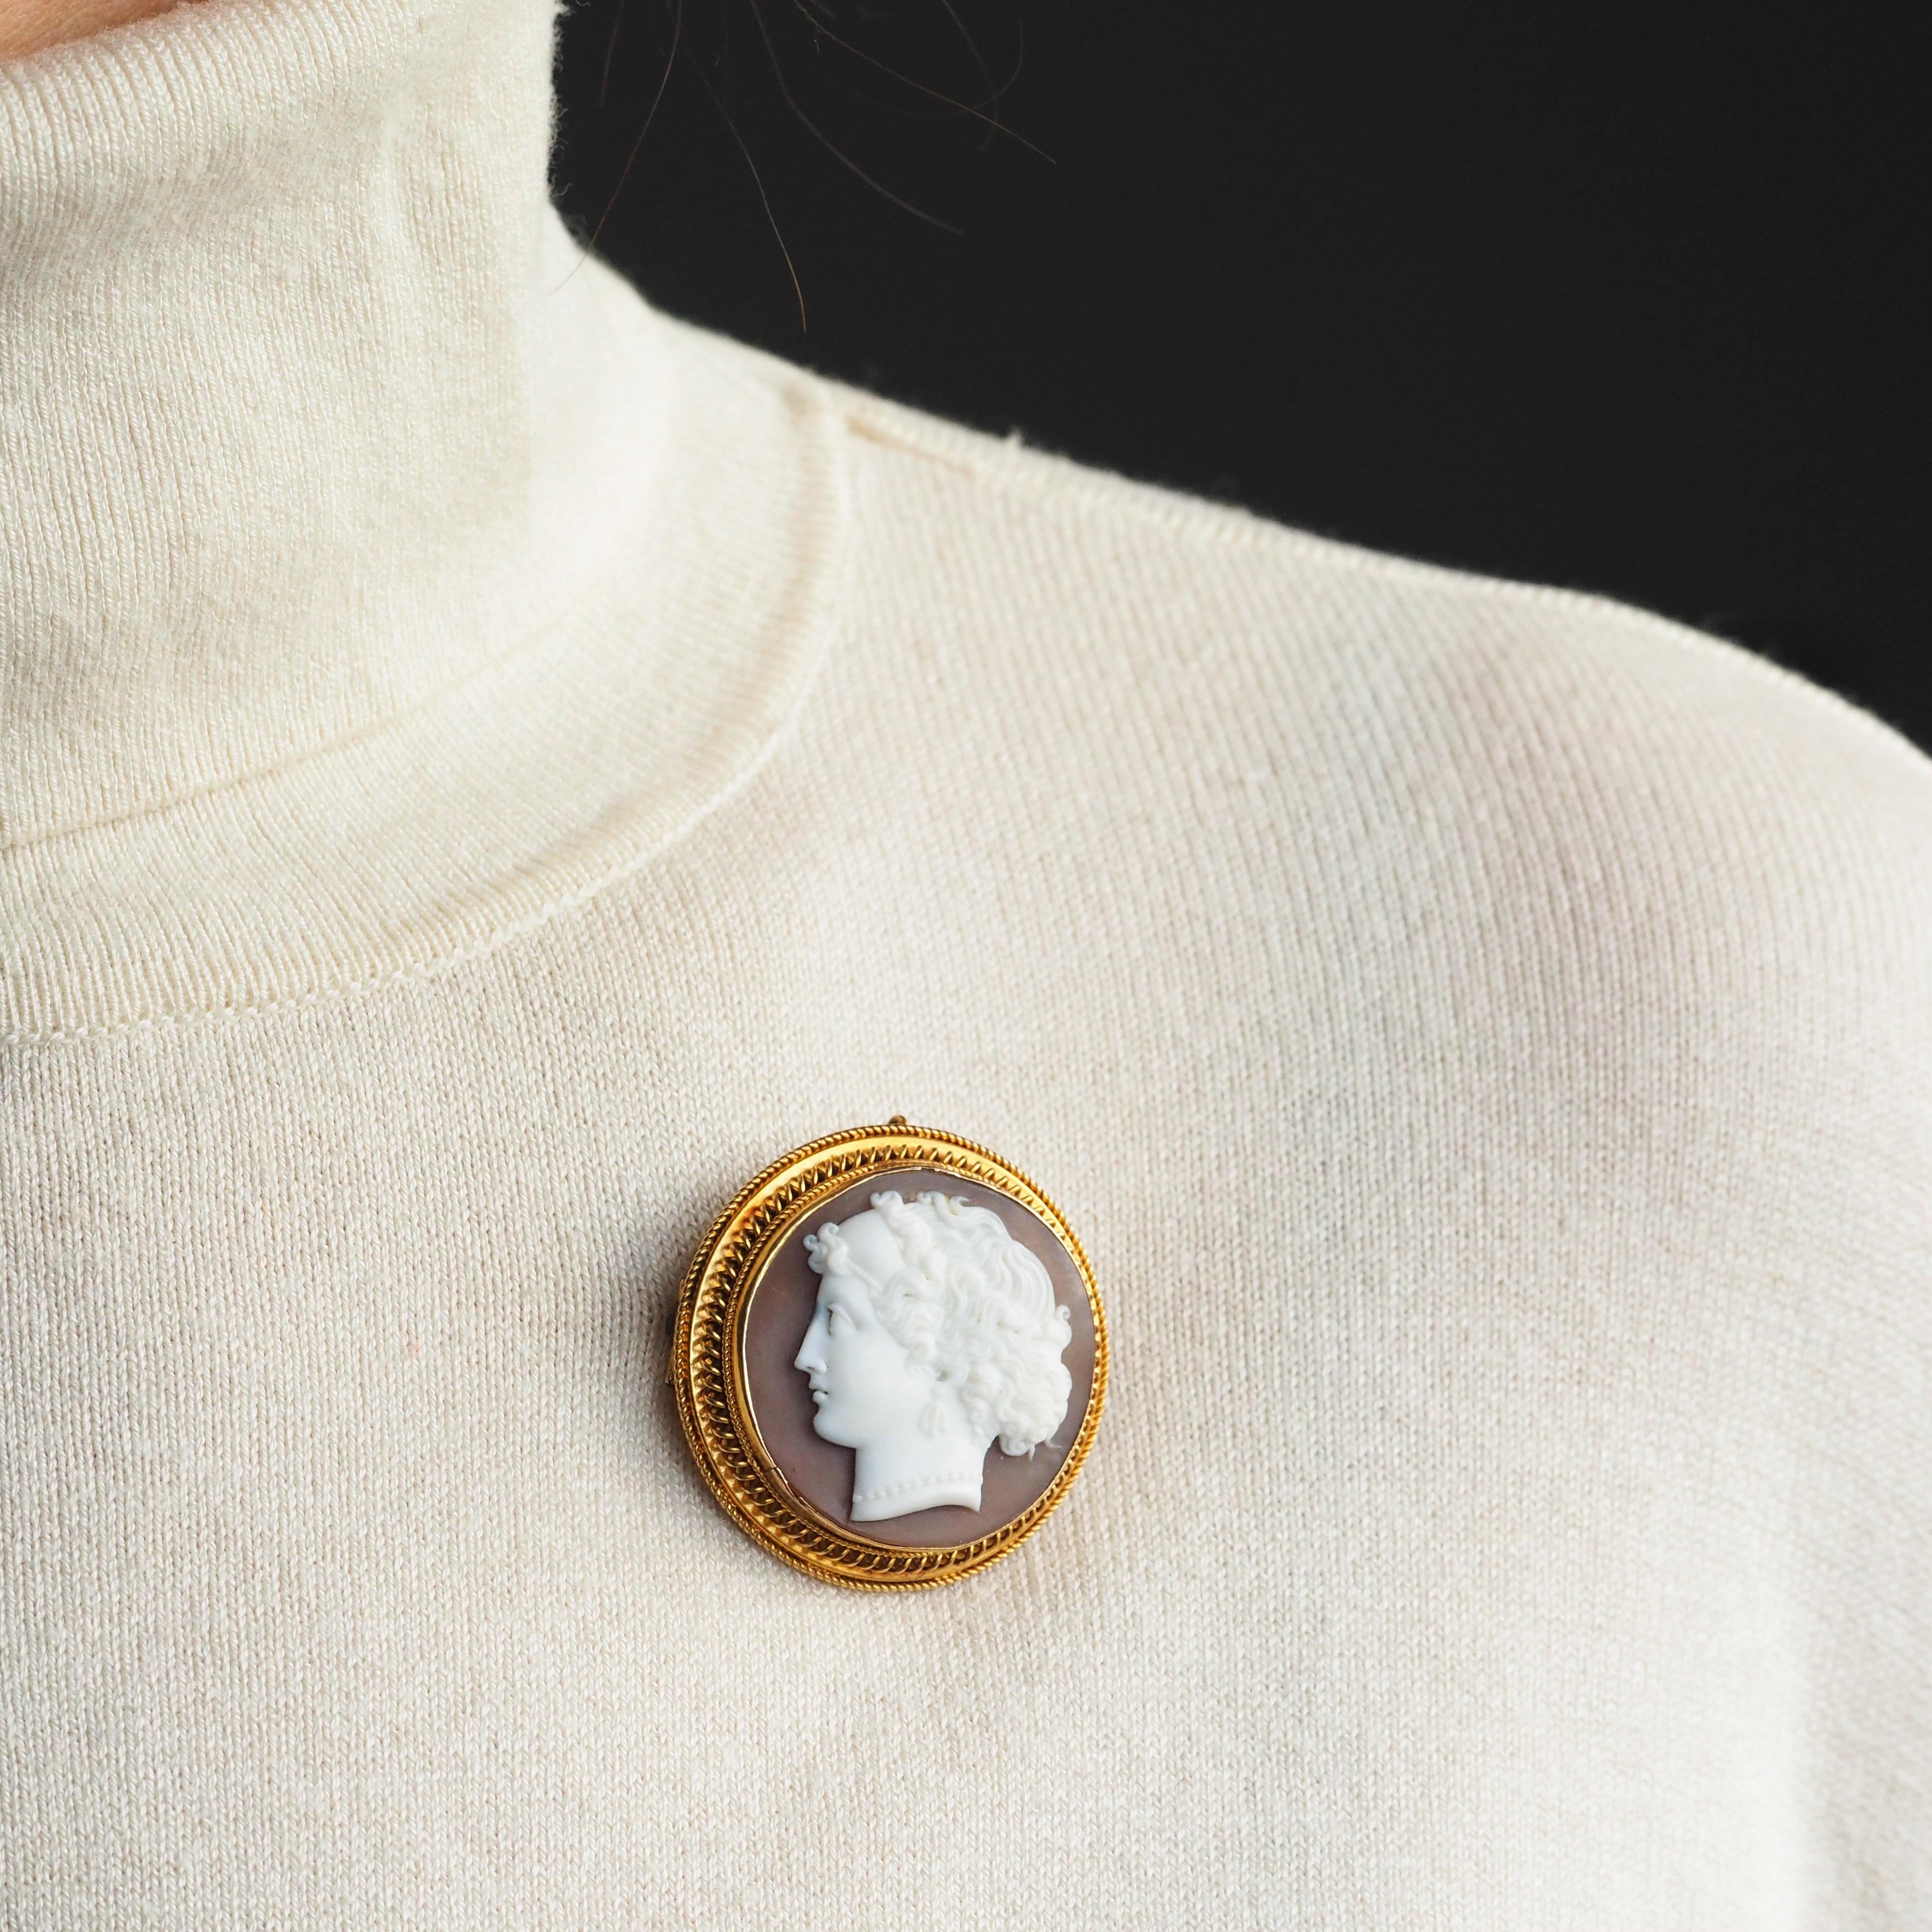 Women's or Men's Antique Victorian Cameo 18K Gold Brooch/Pendant Necklace - c.1880 For Sale